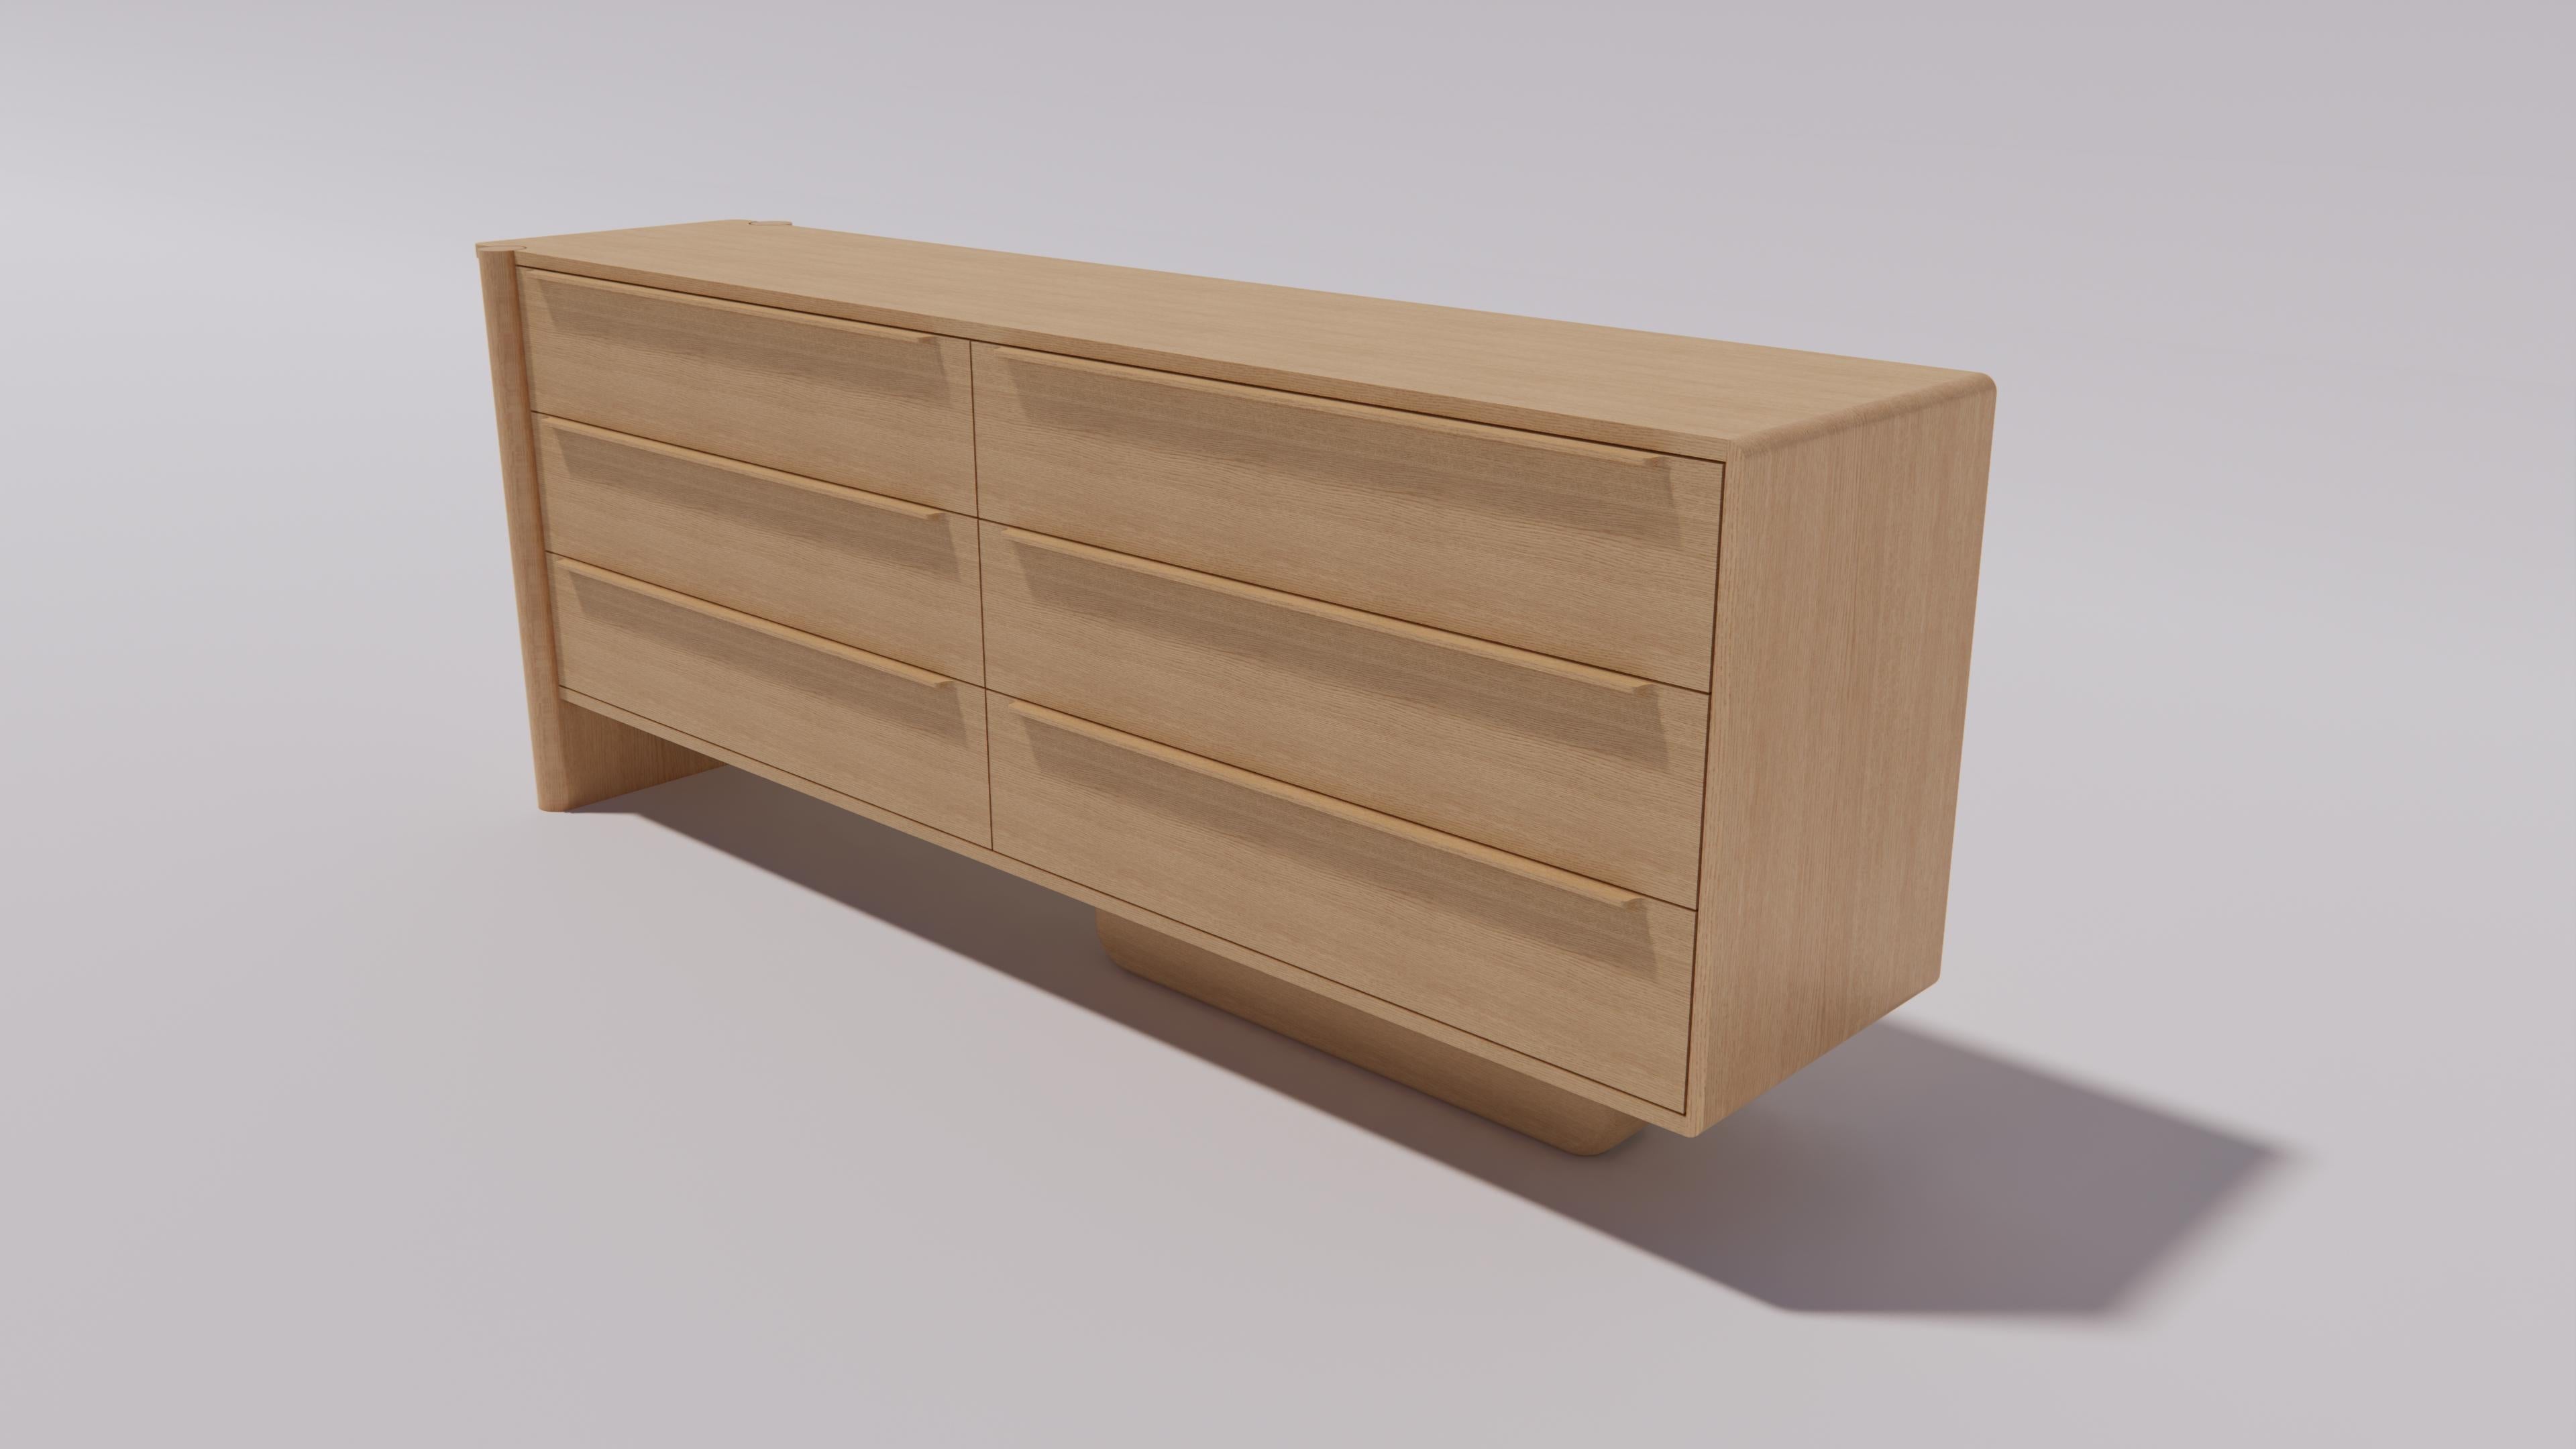 The Sulaco six drawer dresser features an elevated blend of clean lines with its organic form all while providing a tailored look. Generous 8” tall by15” deep drawers yield an ample amount of storage for sleek organization. 

84